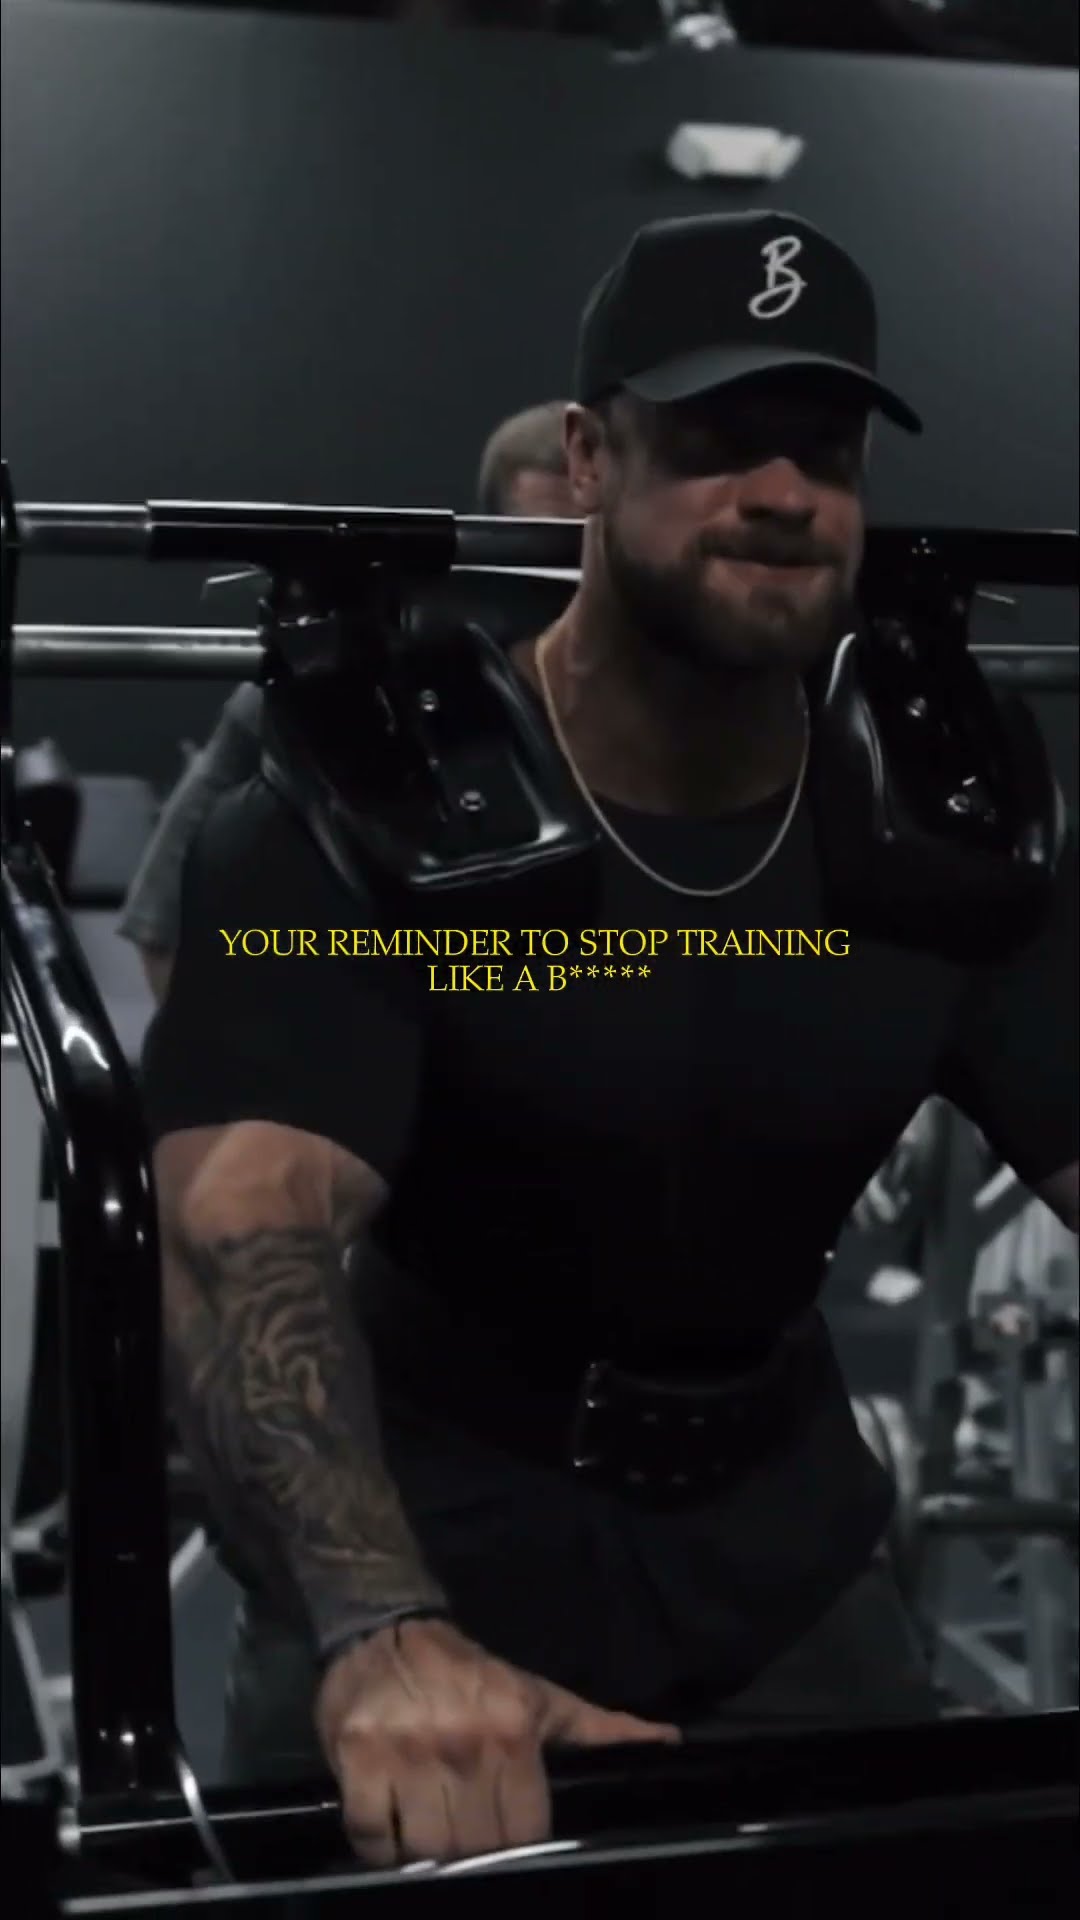 Detriment Your Bodybuilding Career Chris Bumstead Who Himself Has a Forearm  Tattoo Once Warned Bodybuilders Not to Have Them  EssentiallySports